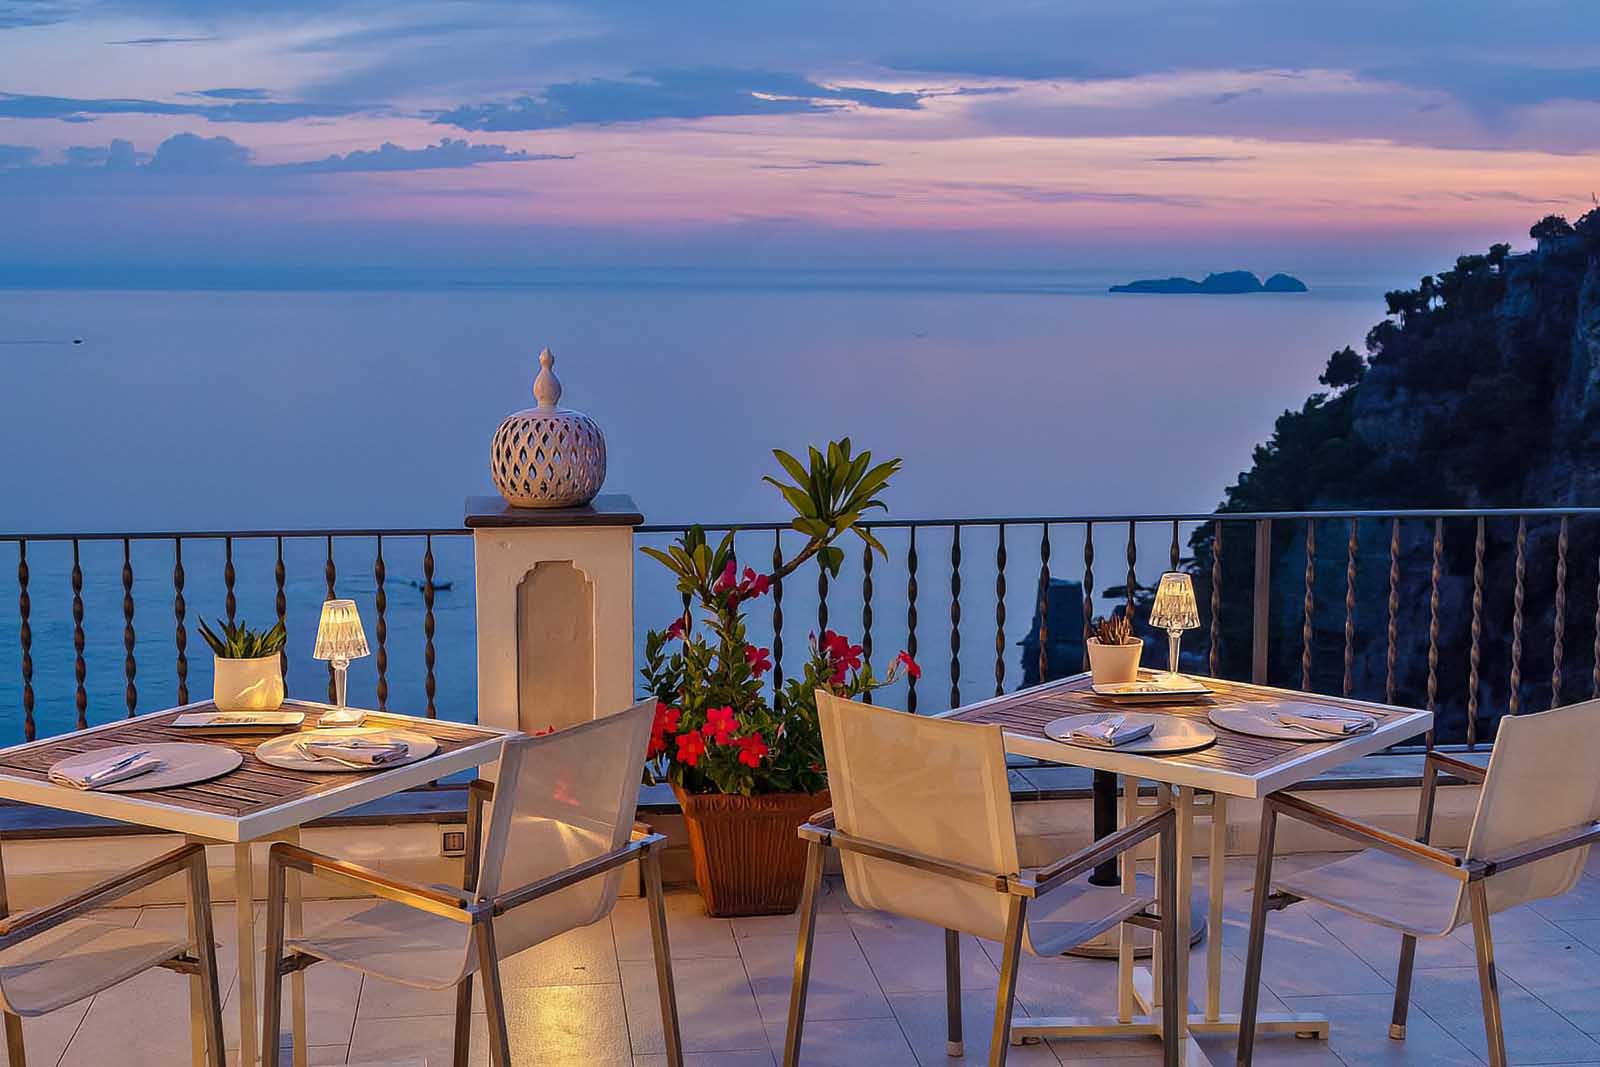 Where to Stay in Positano: Top Positano Hotels for Any Budget - The ...